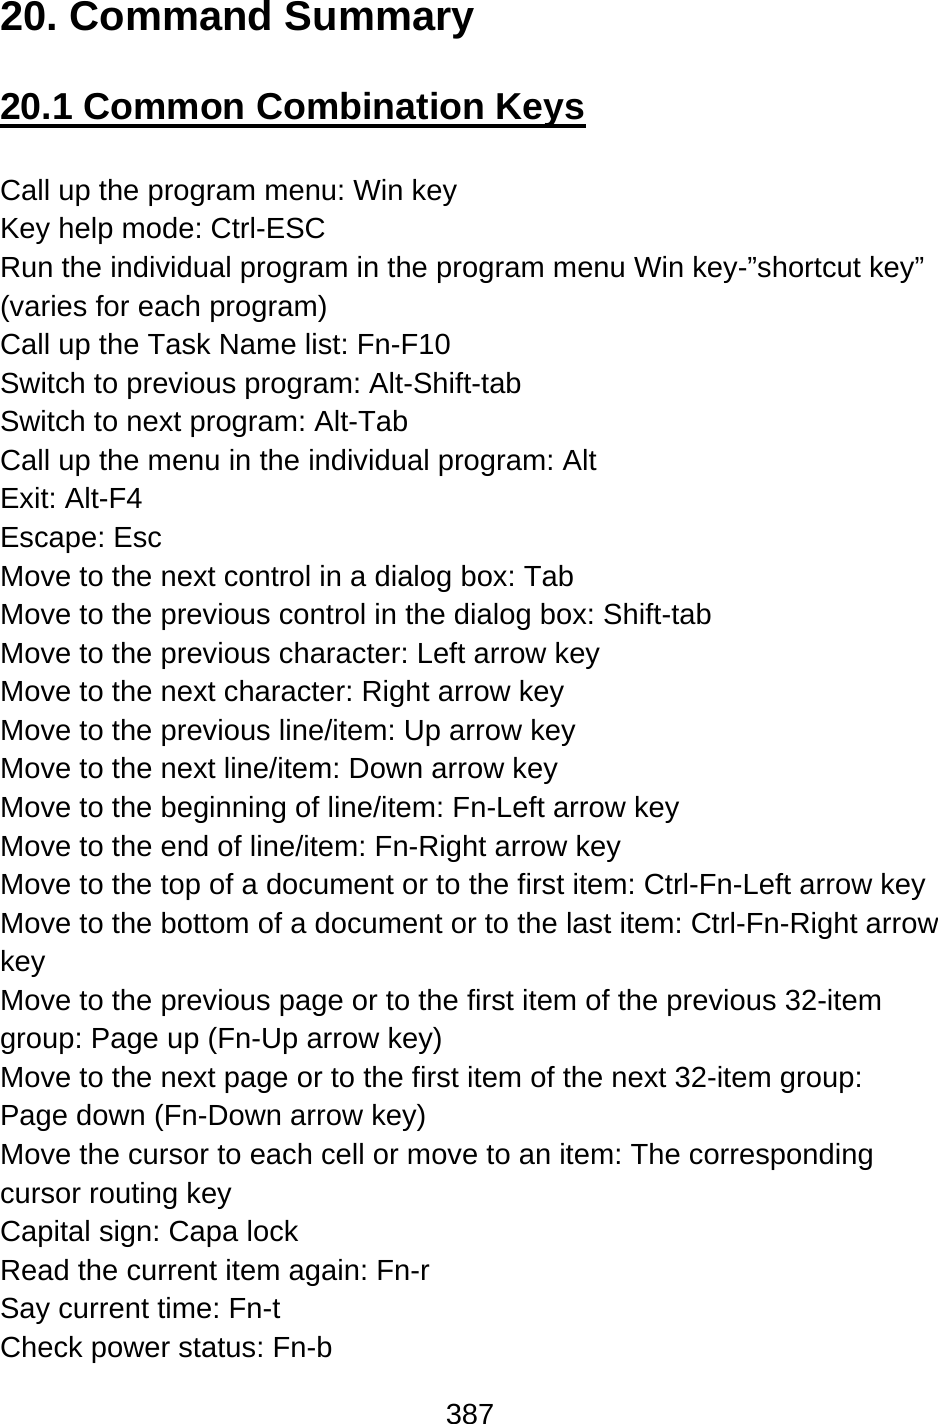 387  20. Command Summary  20.1 Common Combination Keys  Call up the program menu: Win key Key help mode: Ctrl-ESC Run the individual program in the program menu Win key-”shortcut key” (varies for each program) Call up the Task Name list: Fn-F10 Switch to previous program: Alt-Shift-tab Switch to next program: Alt-Tab Call up the menu in the individual program: Alt Exit: Alt-F4 Escape: Esc Move to the next control in a dialog box: Tab Move to the previous control in the dialog box: Shift-tab Move to the previous character: Left arrow key Move to the next character: Right arrow key Move to the previous line/item: Up arrow key Move to the next line/item: Down arrow key Move to the beginning of line/item: Fn-Left arrow key Move to the end of line/item: Fn-Right arrow key Move to the top of a document or to the first item: Ctrl-Fn-Left arrow key Move to the bottom of a document or to the last item: Ctrl-Fn-Right arrow key Move to the previous page or to the first item of the previous 32-item group: Page up (Fn-Up arrow key) Move to the next page or to the first item of the next 32-item group:   Page down (Fn-Down arrow key) Move the cursor to each cell or move to an item: The corresponding cursor routing key Capital sign: Capa lock Read the current item again: Fn-r Say current time: Fn-t   Check power status: Fn-b 